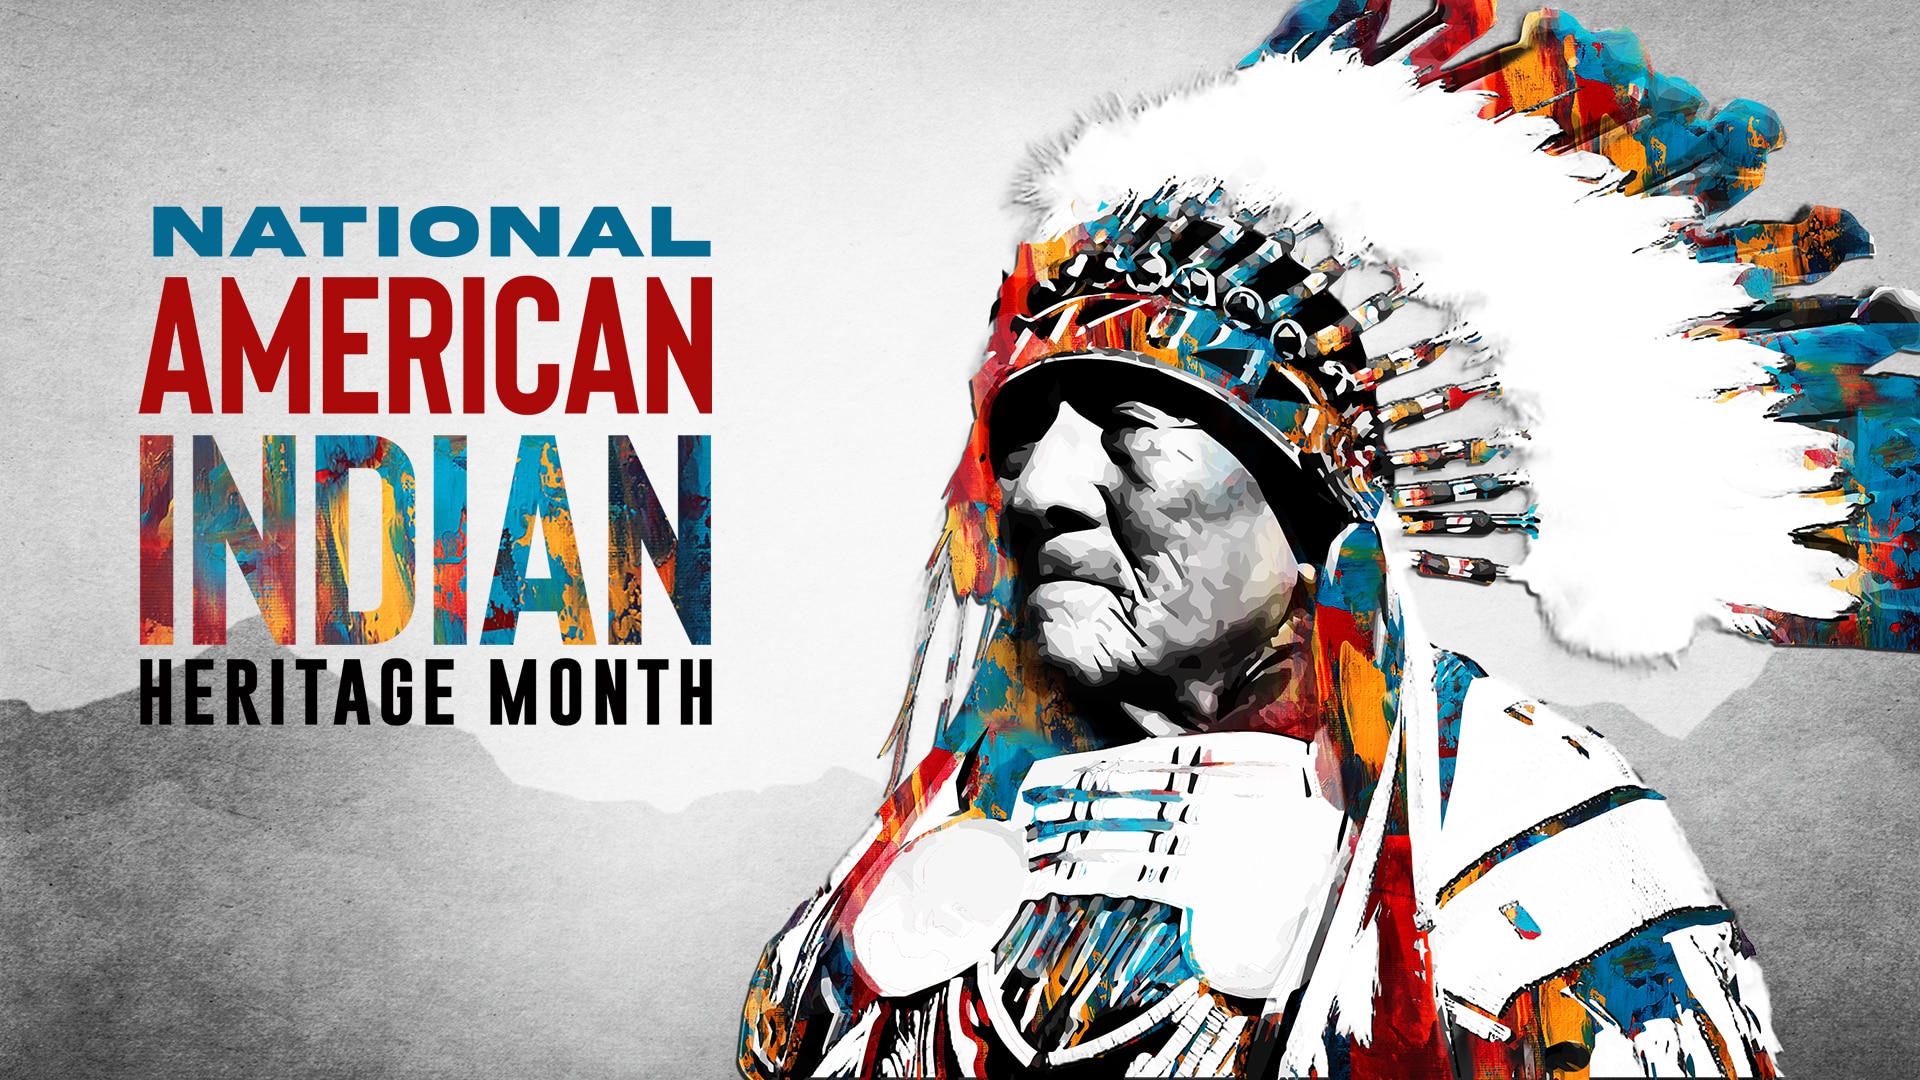 The 2022 Department of Defense NAIHM poster is focused on U.S. Army Technician 5th Grade Joseph Medicine Crow, the last Crow War Chief. Crow is artistically represented on the poster in traditional Crow war bonnet and clothing made of leather, animal fur, beads, bones, and eagle feathers.